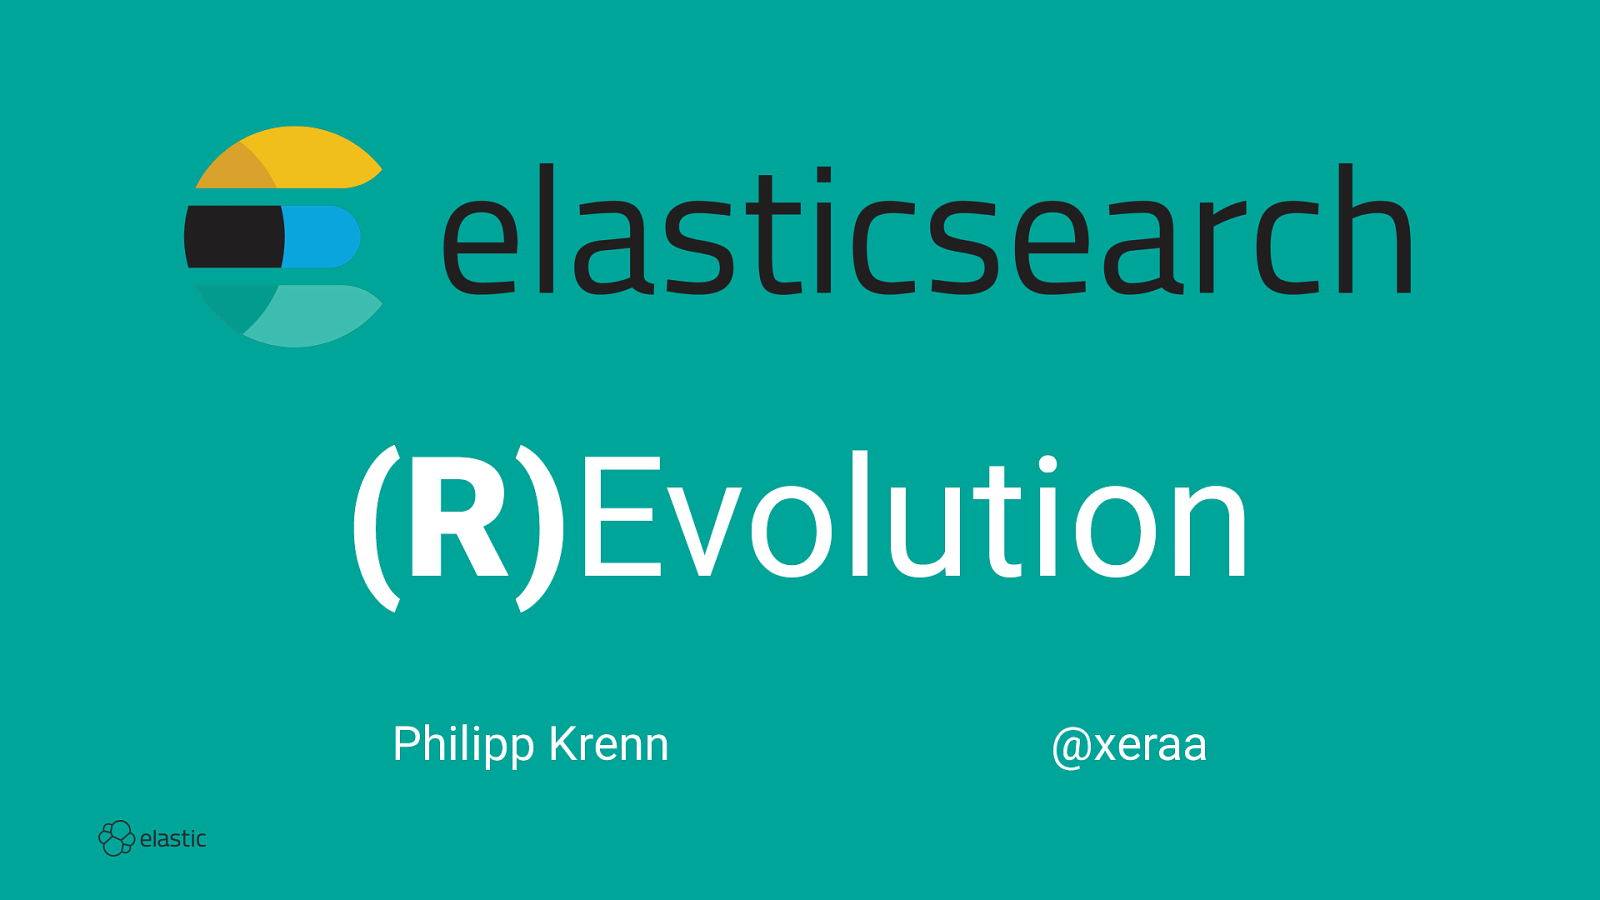 Elasticsearch (R)Evolution — You Know, for Search...